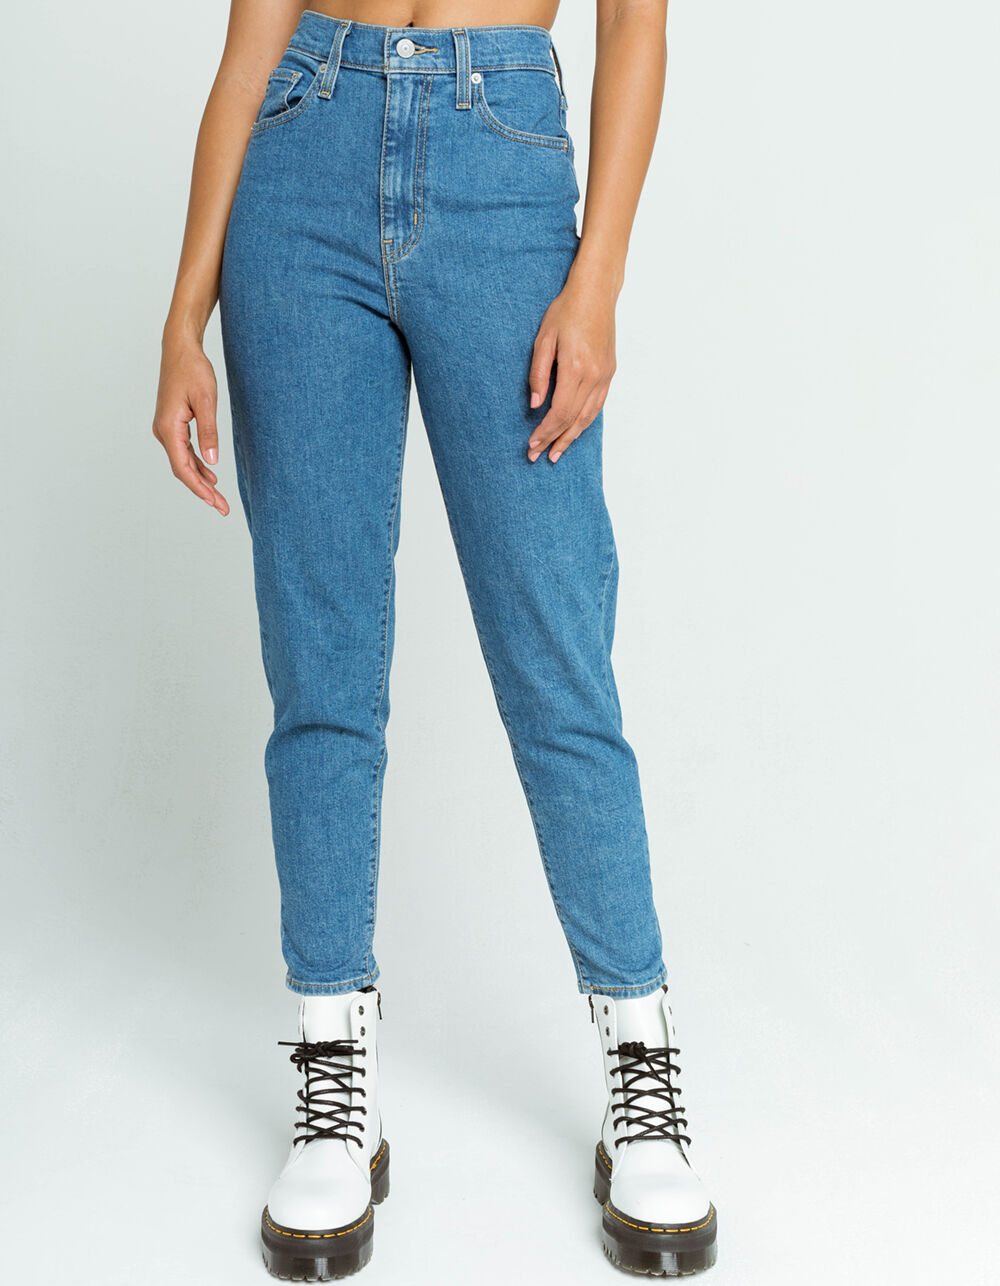 LEVI'S Womens Tapered High Rise Jeans - LIGHT STONE | Tillys